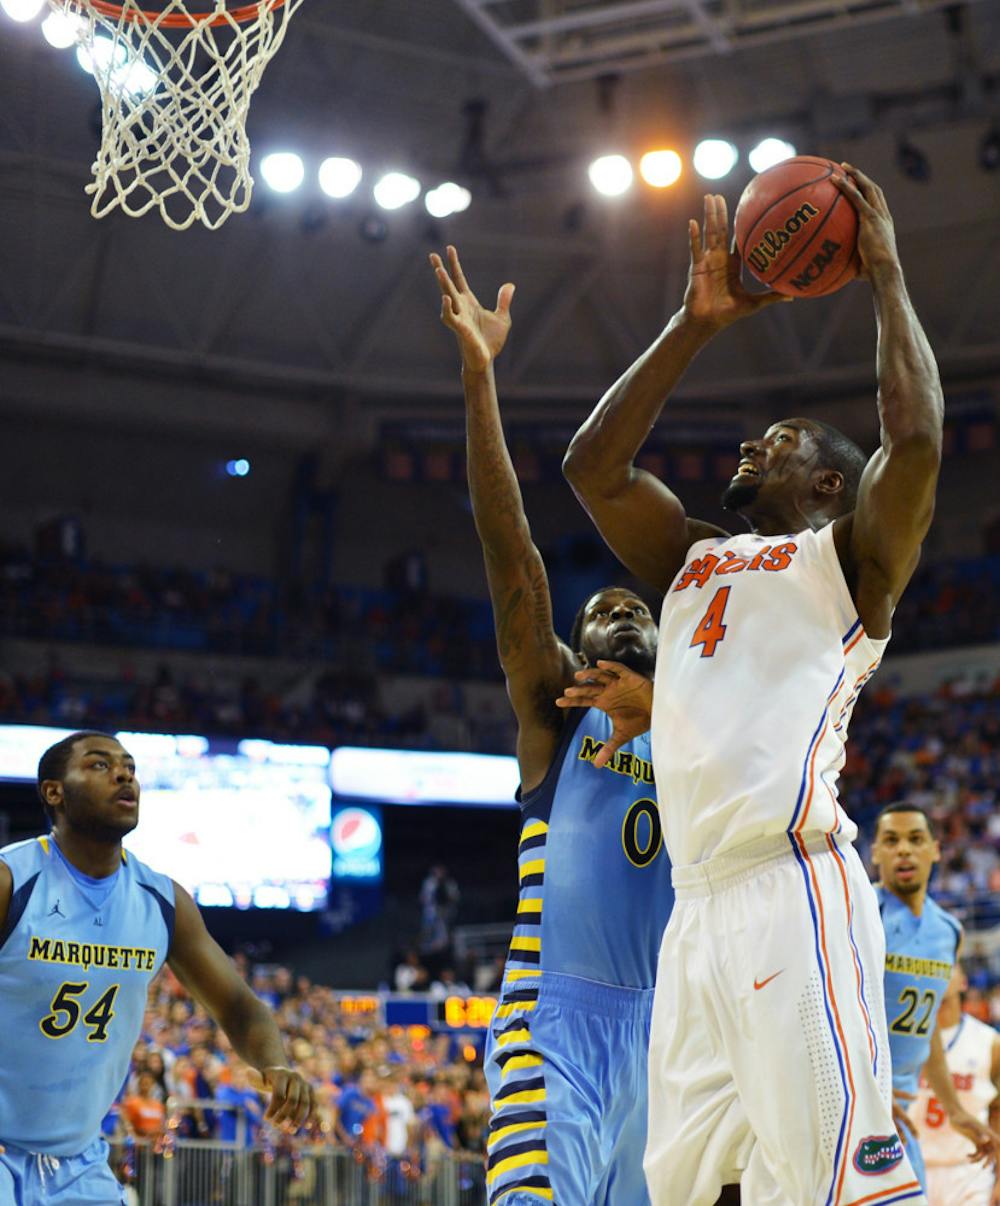 <p><span>Patric Young attempts a shot during UF’s 82-49 win against Marquette on Thursday in the O’Connell Center. Young scored 10 points and grabbed 10 rebounds off the bench. </span></p>